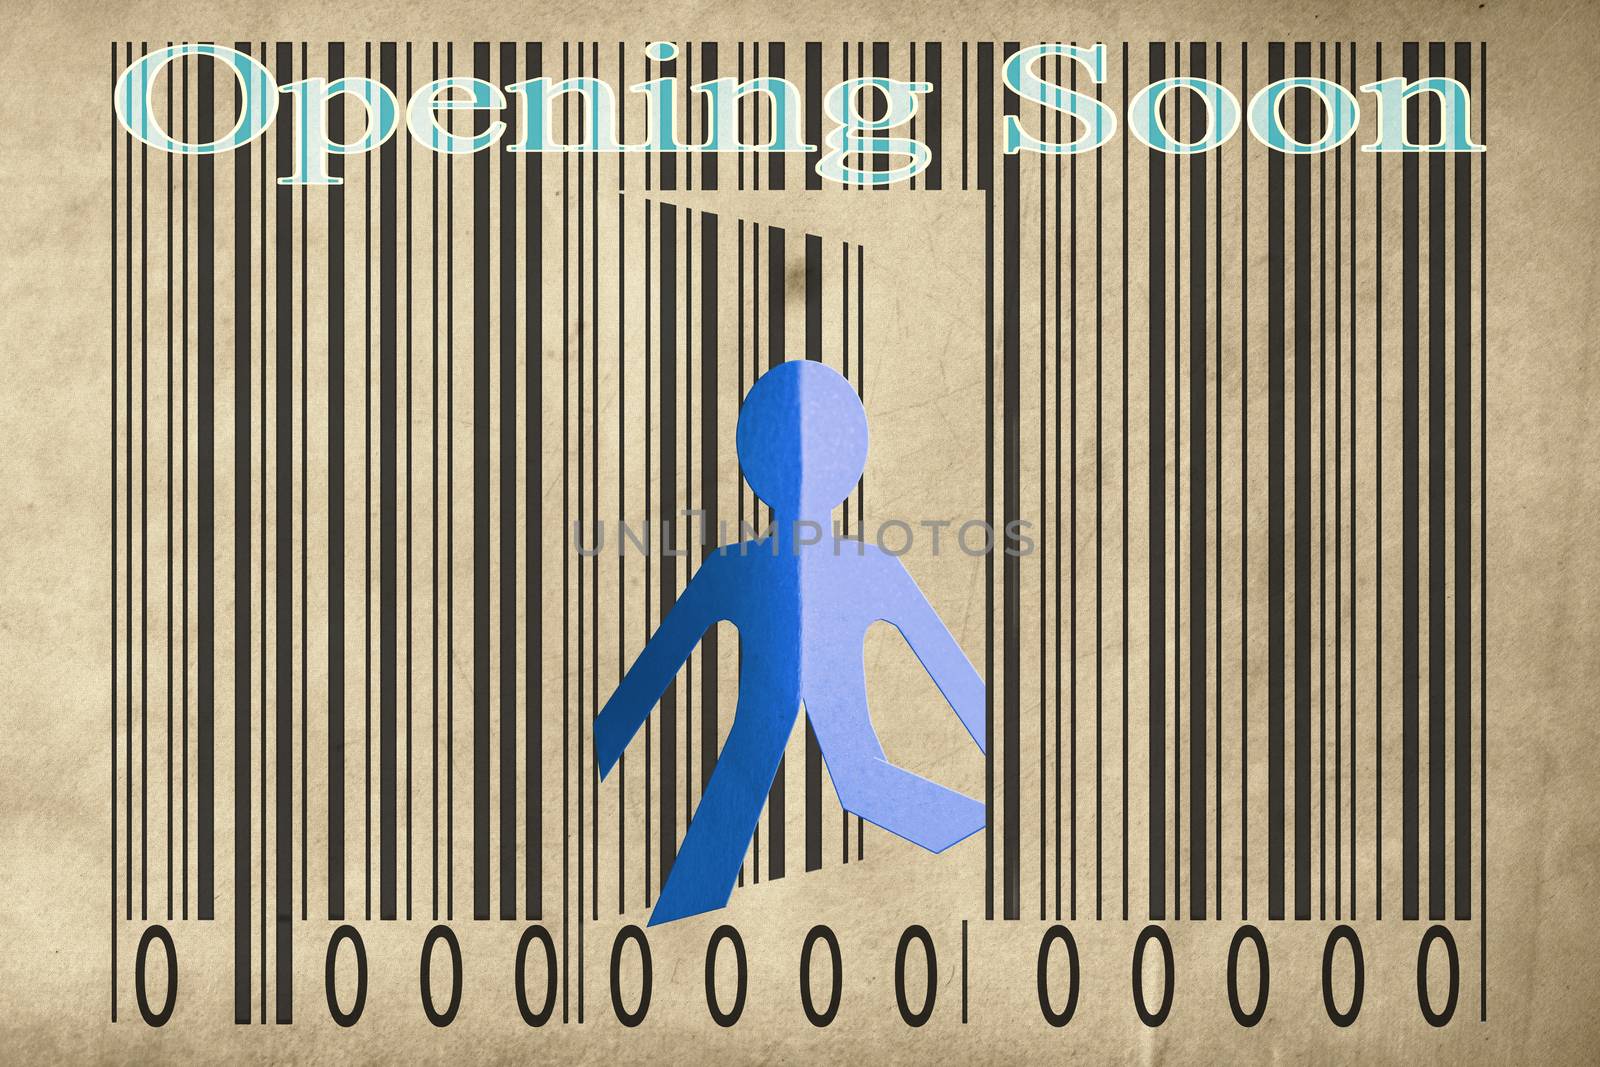 Paperman coming out of a bar code with Opening soon Words by yands